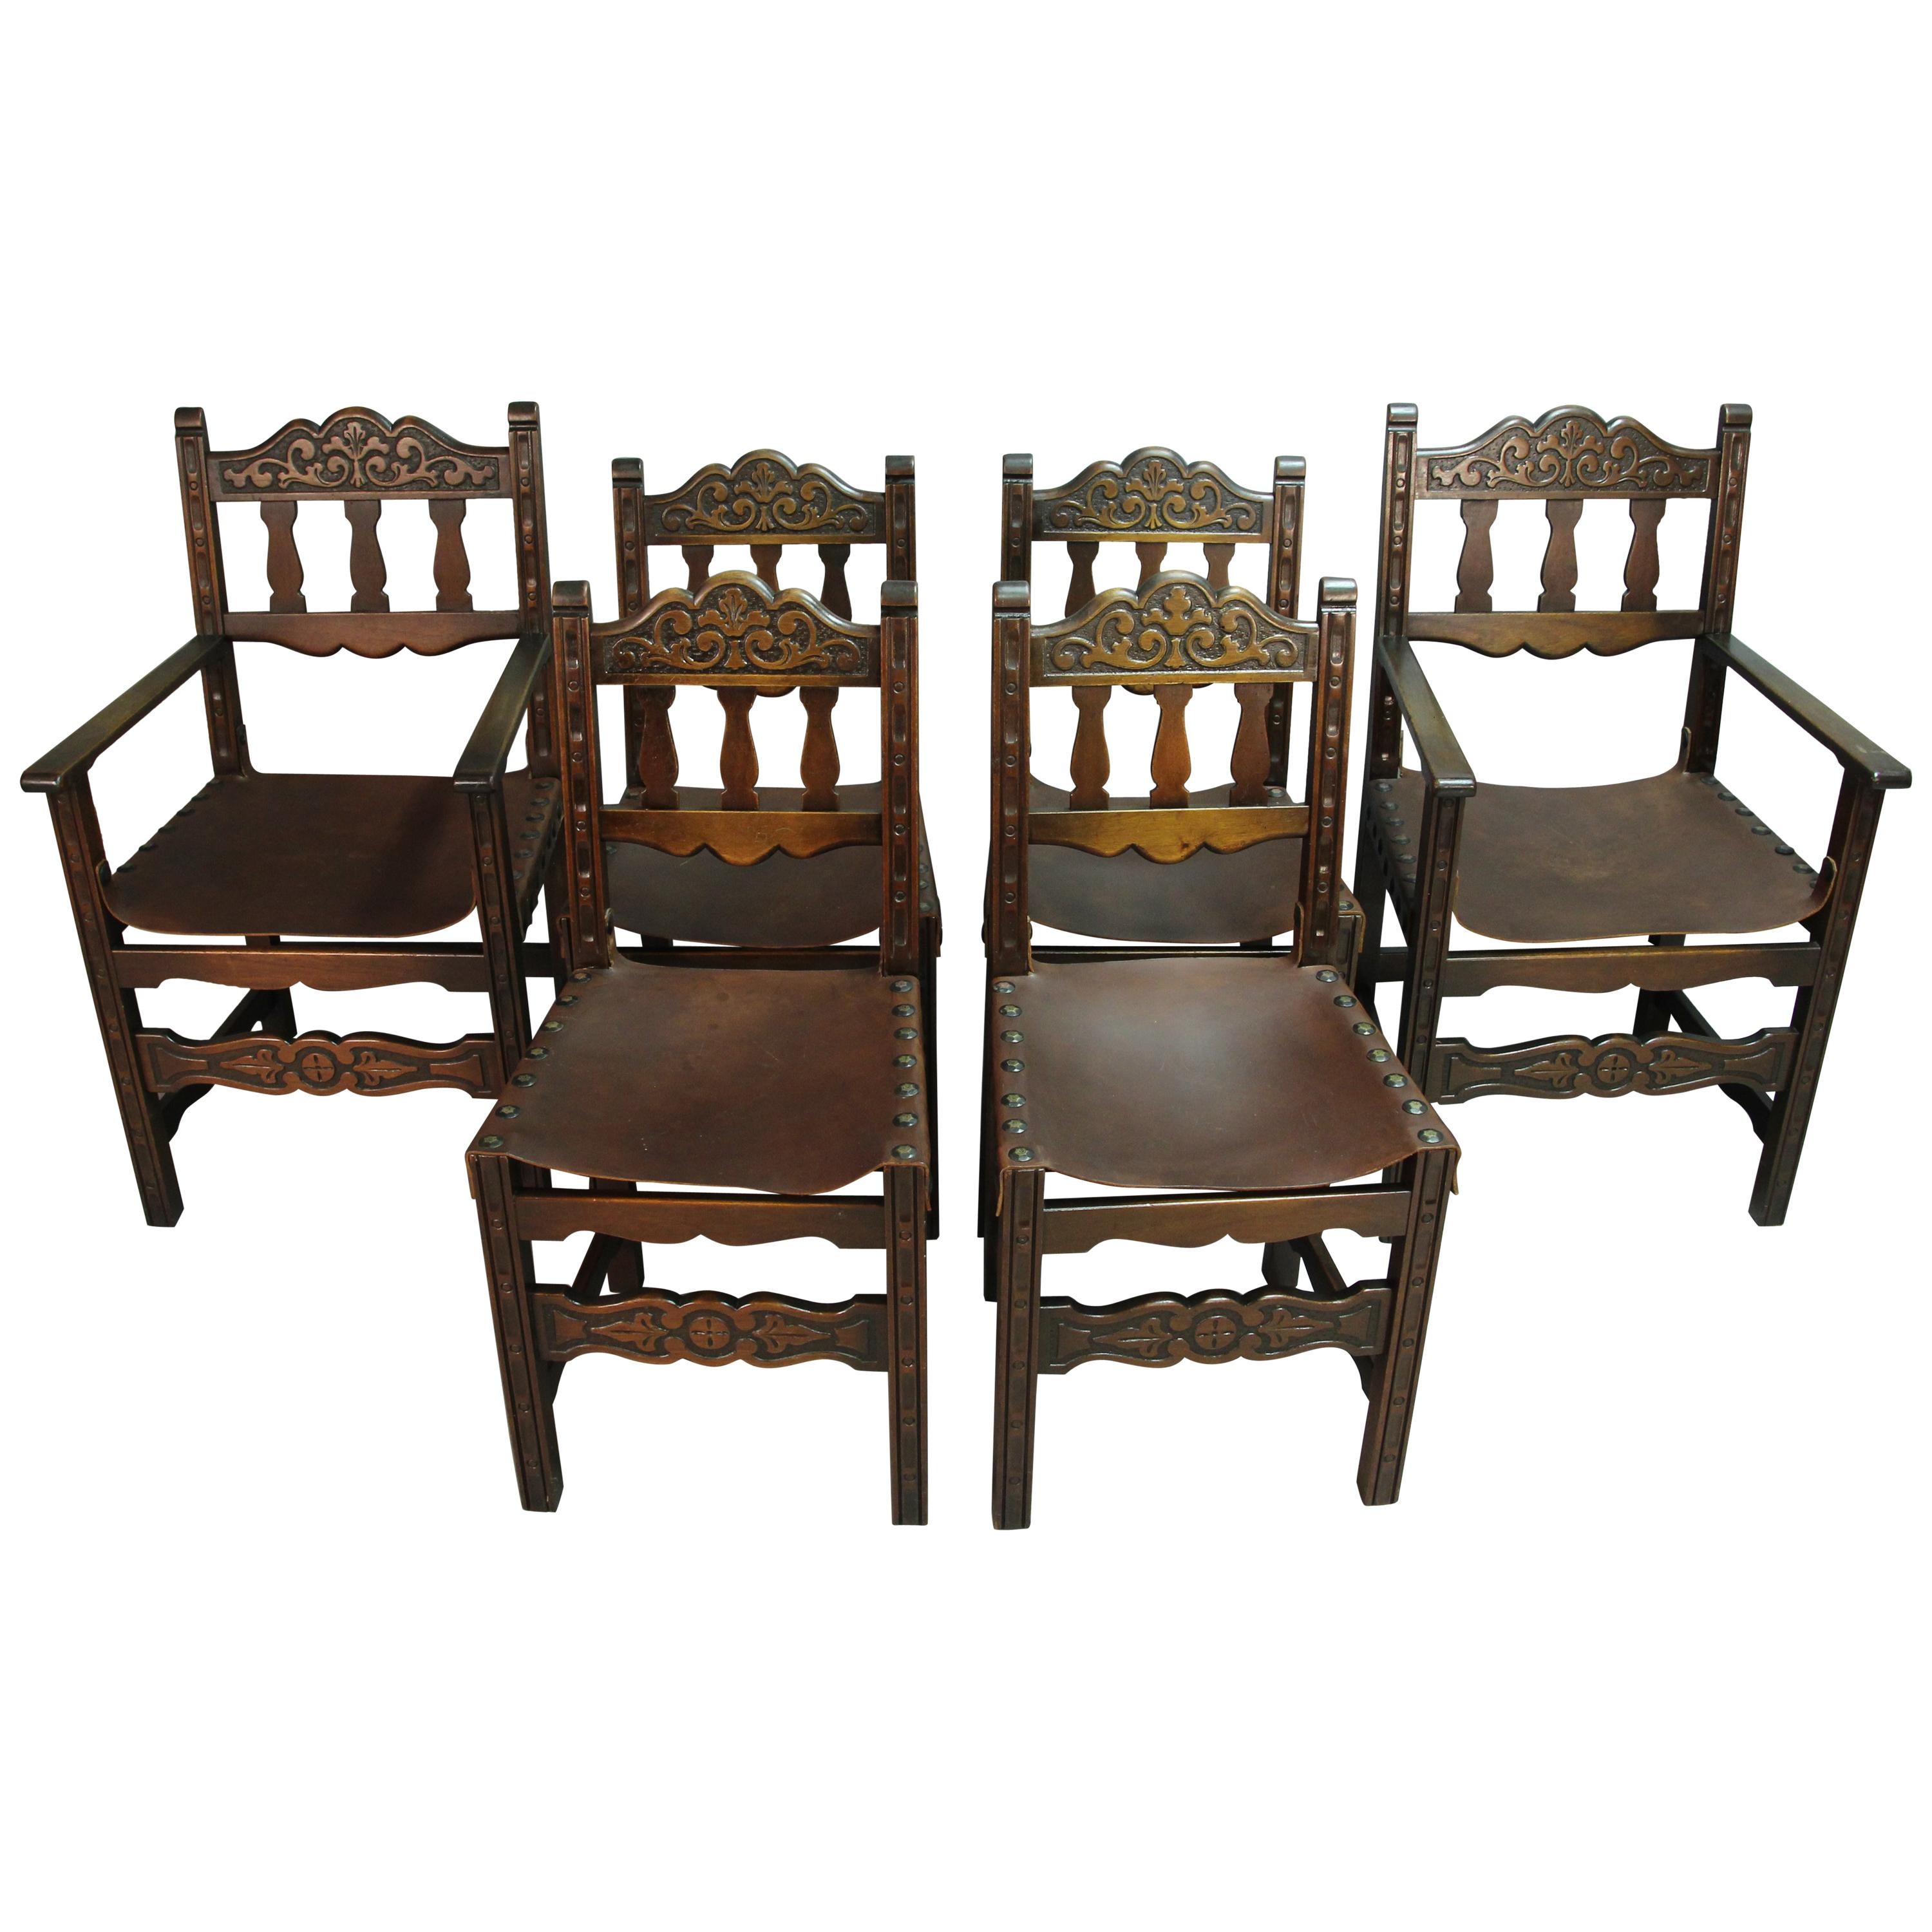 Antique 1920s Set of 6 Spanish Revival Dining Room Chairs with Leather